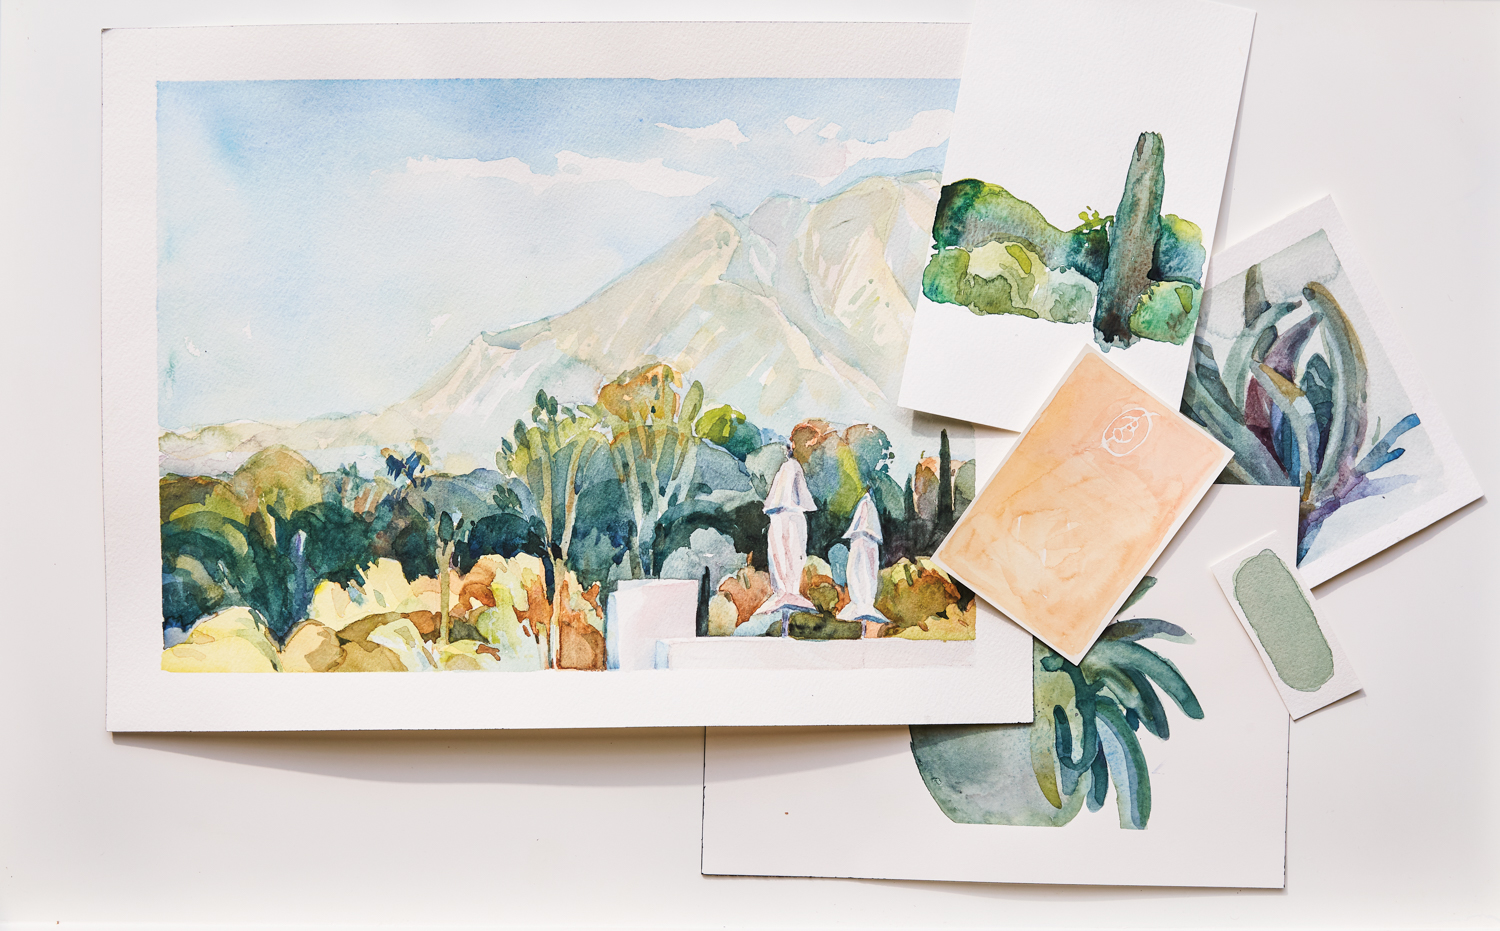 Watercolors of Southern California landscapes that inspired the Barbara Barry x Kravet Ojai collab